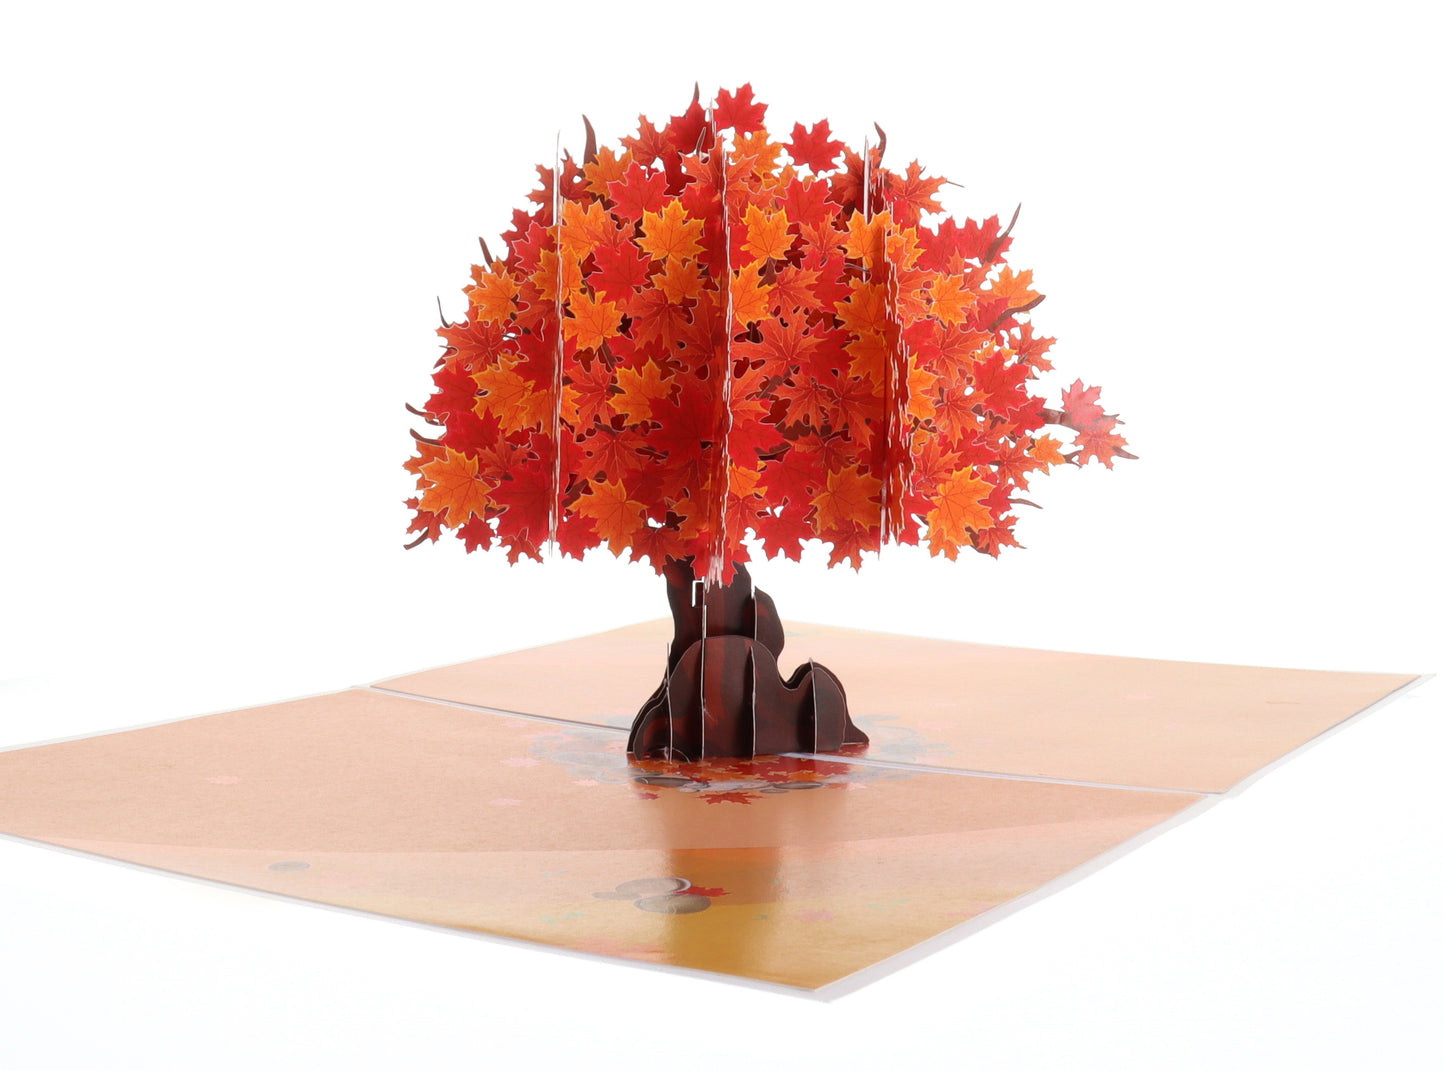 Hello Autumn Maple Tree 3D Pop Up Greeting Card - Autumn - best deal - Brighten Someone’s Day - Happ - iGifts And Cards